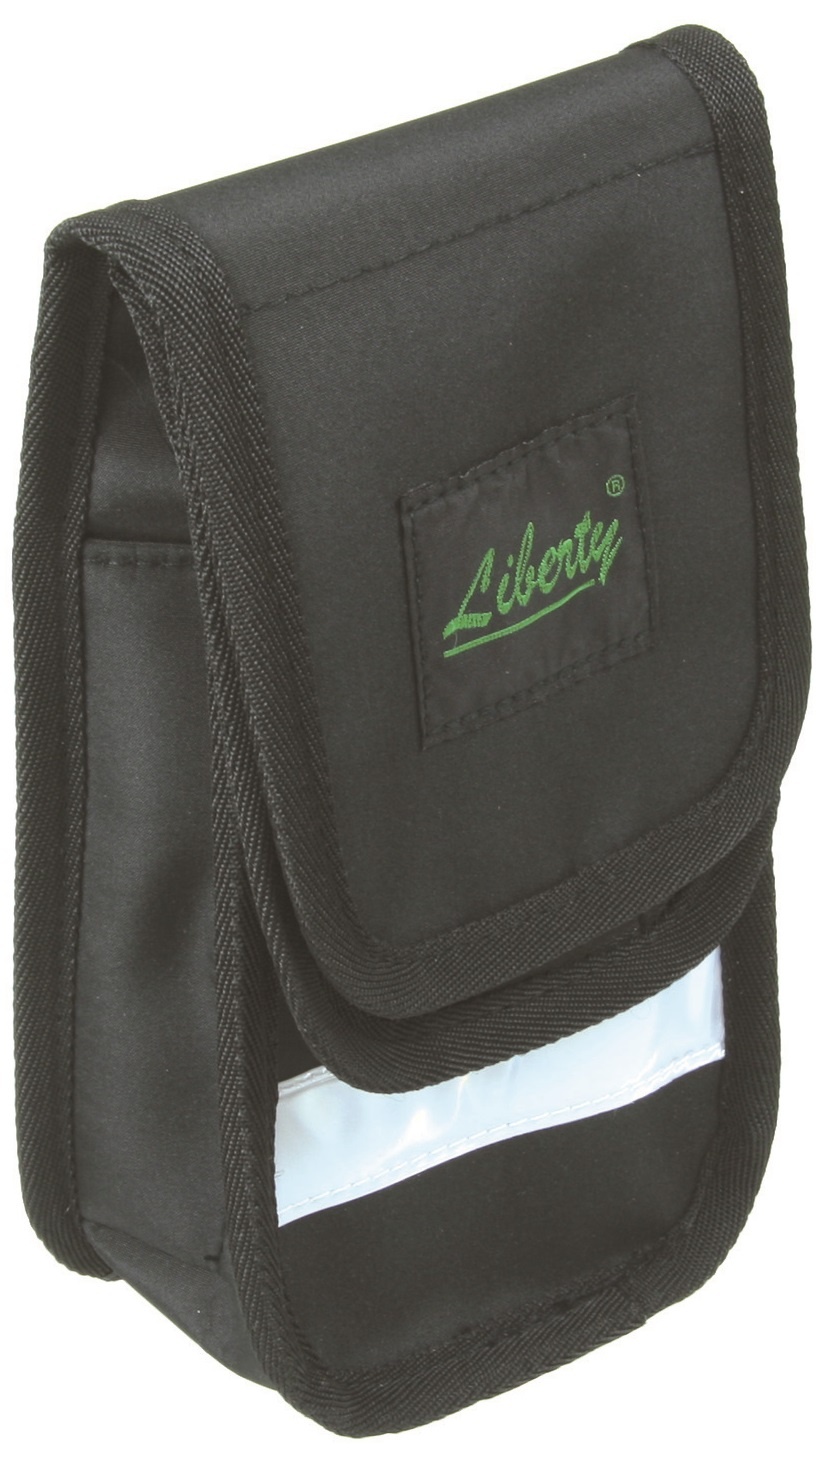 Paramedic Pouch for Stethoscope and Equipment